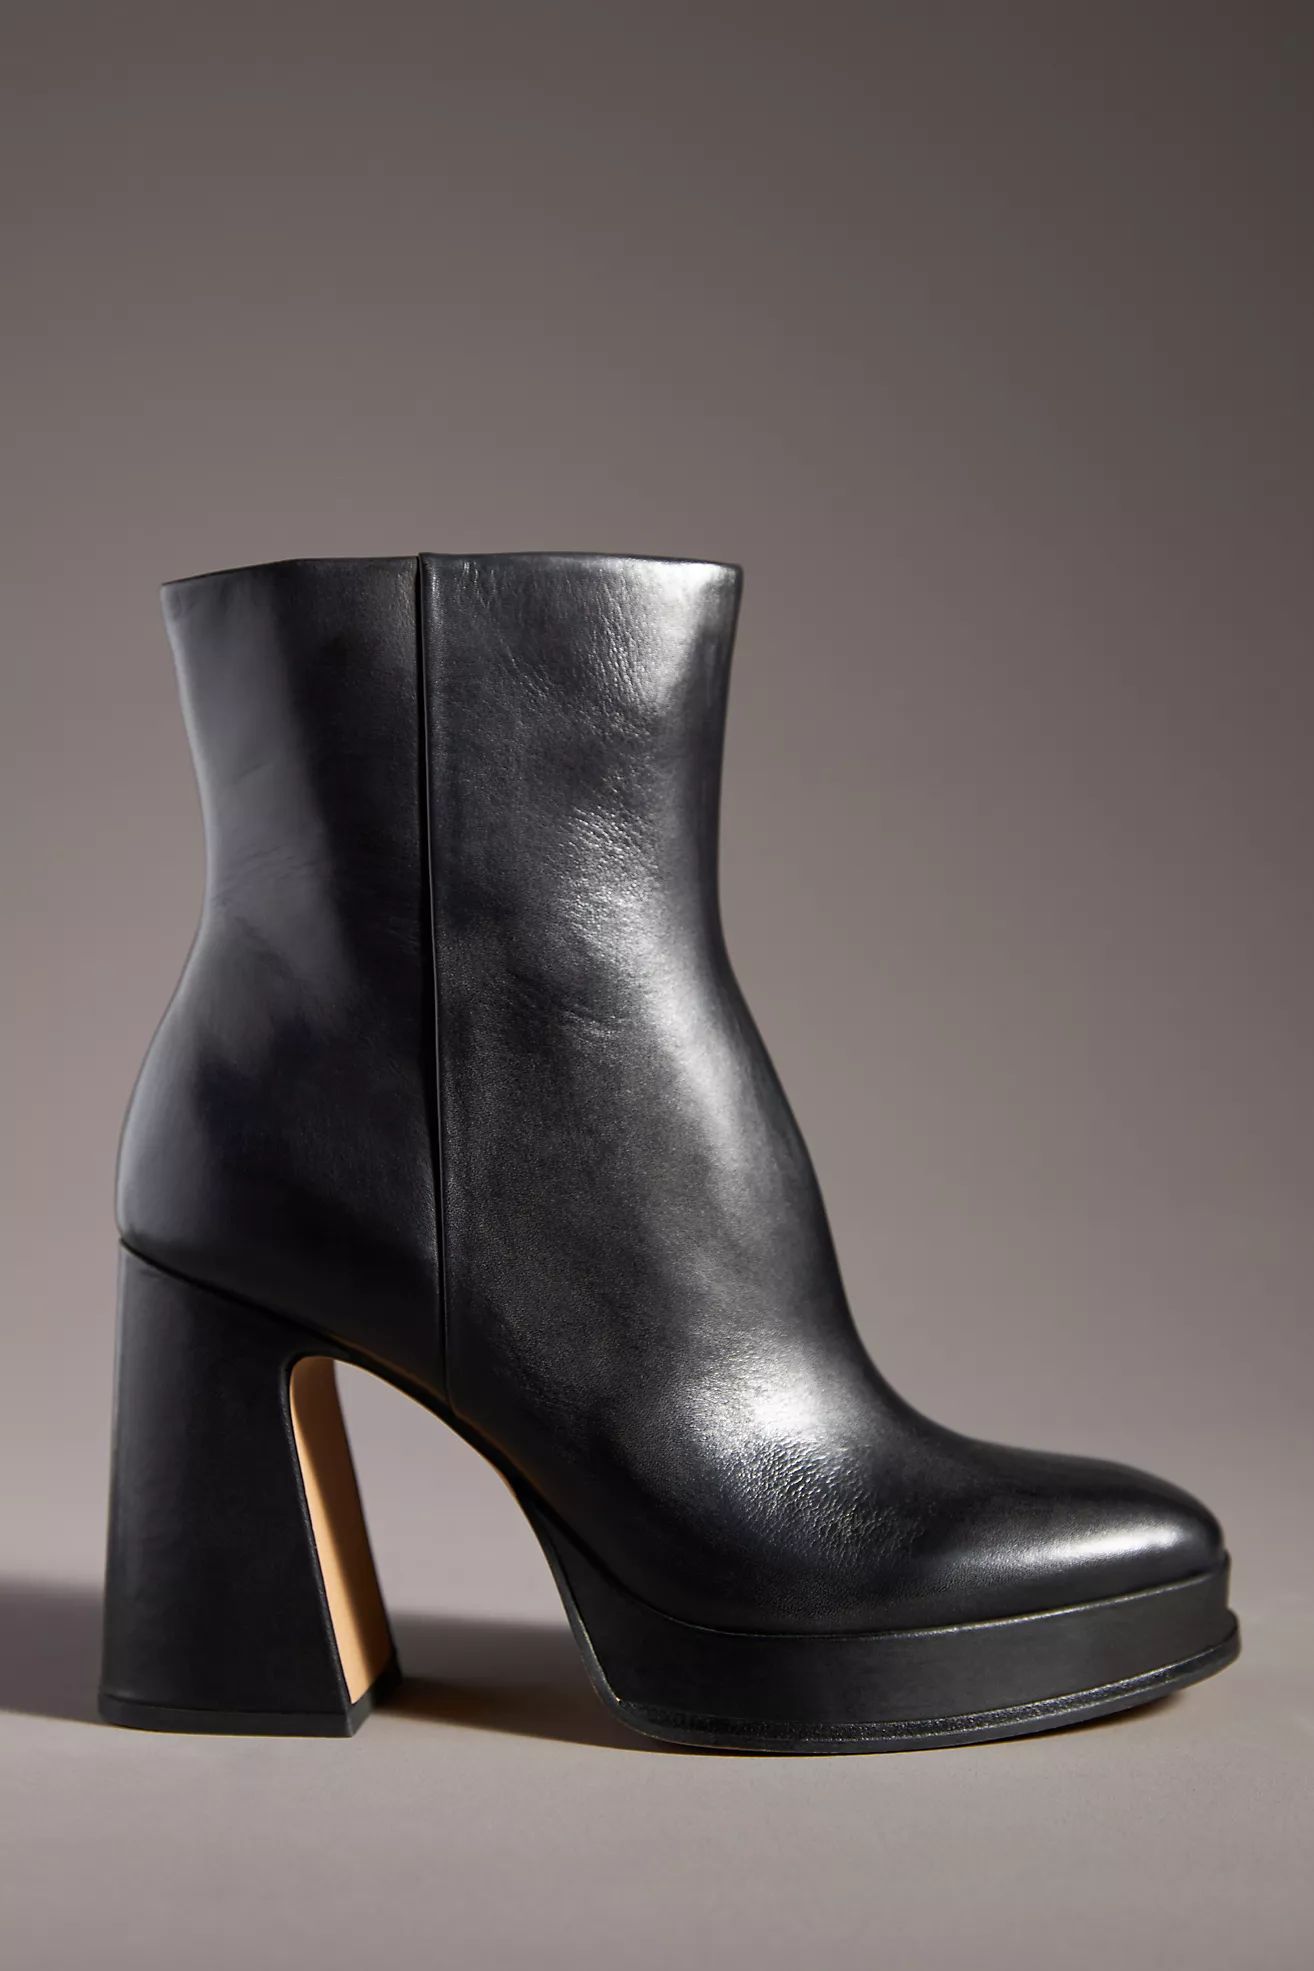 Dolce Vita Lochly Boots | Anthropologie (US)